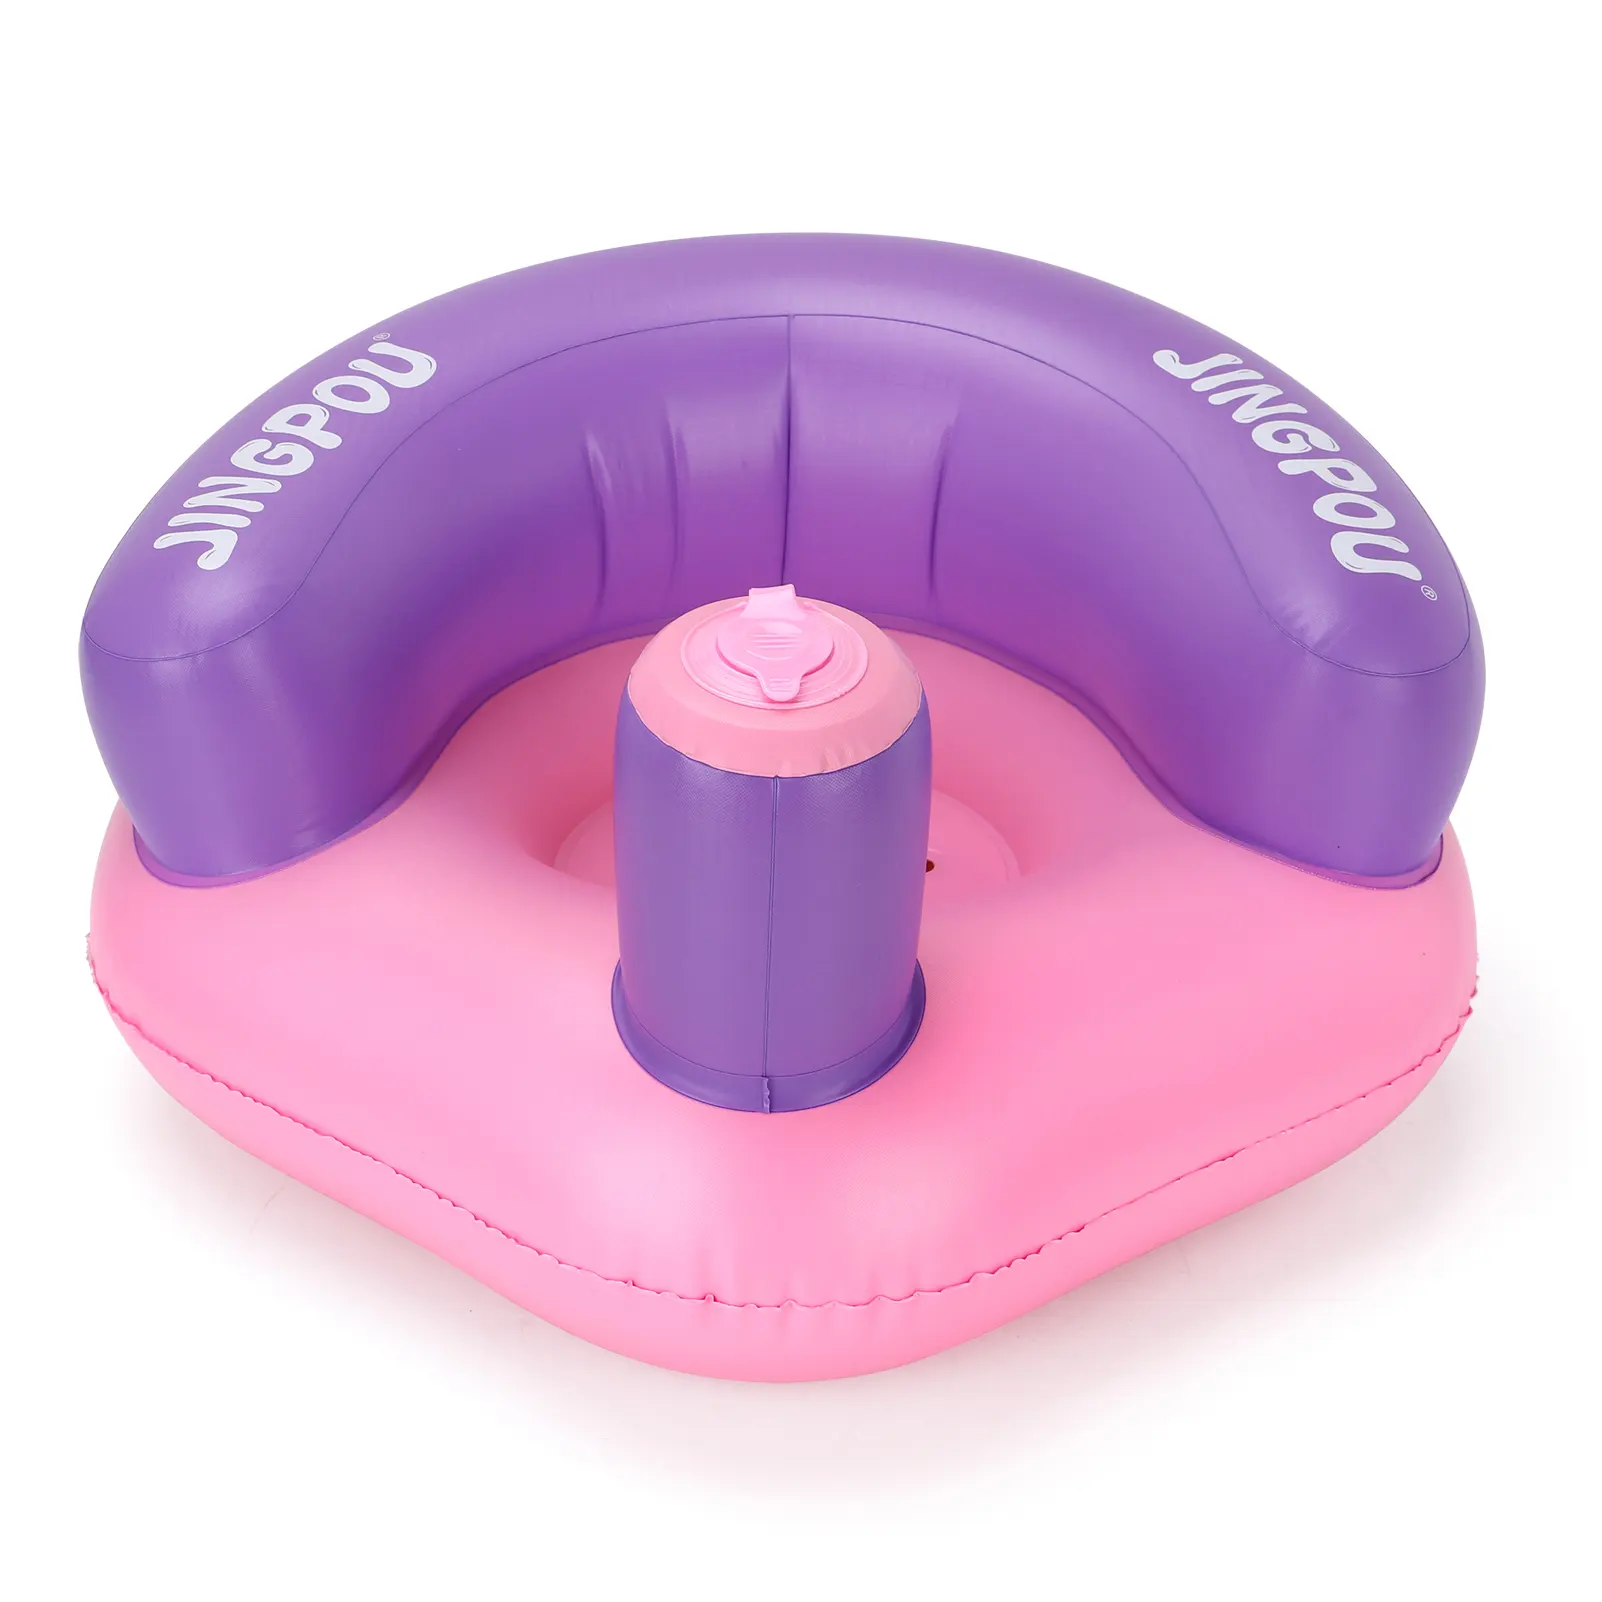 Swimbobo Inflatable Portable Fold Baby Sofa Seat Chairs for Bath Shower Learning Bathing Stool Eating Pvc Chair